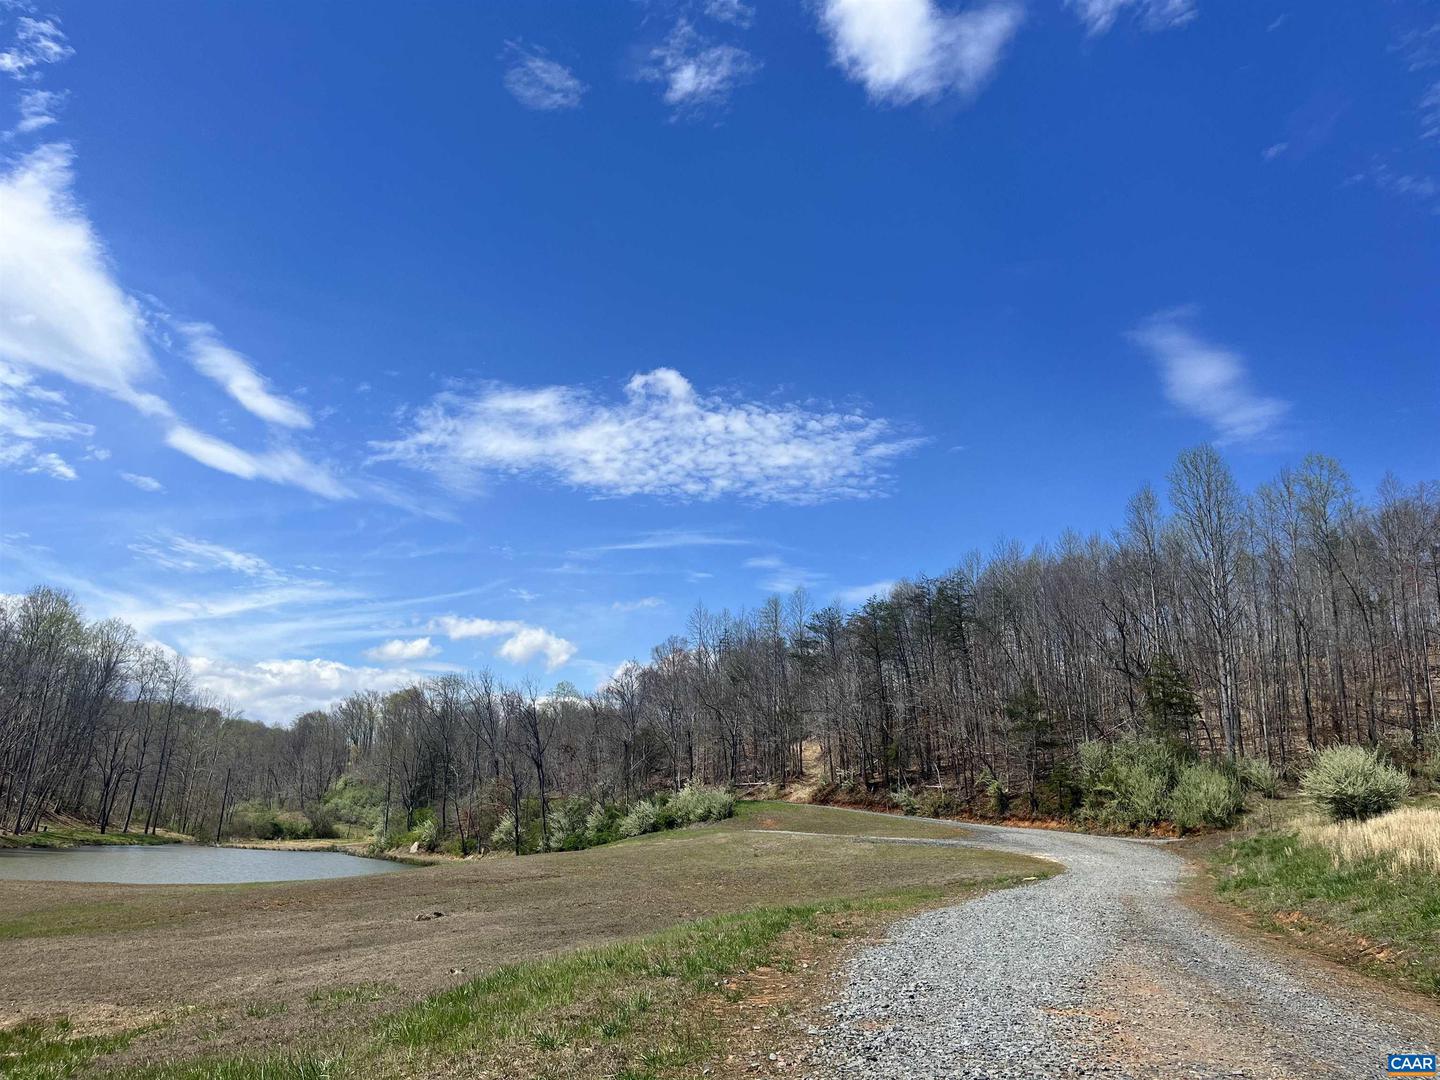 0 WILLOW BRANCH LN #2, FABER, Virginia 22938, ,Land,For sale,0 WILLOW BRANCH LN #2,649236 MLS # 649236